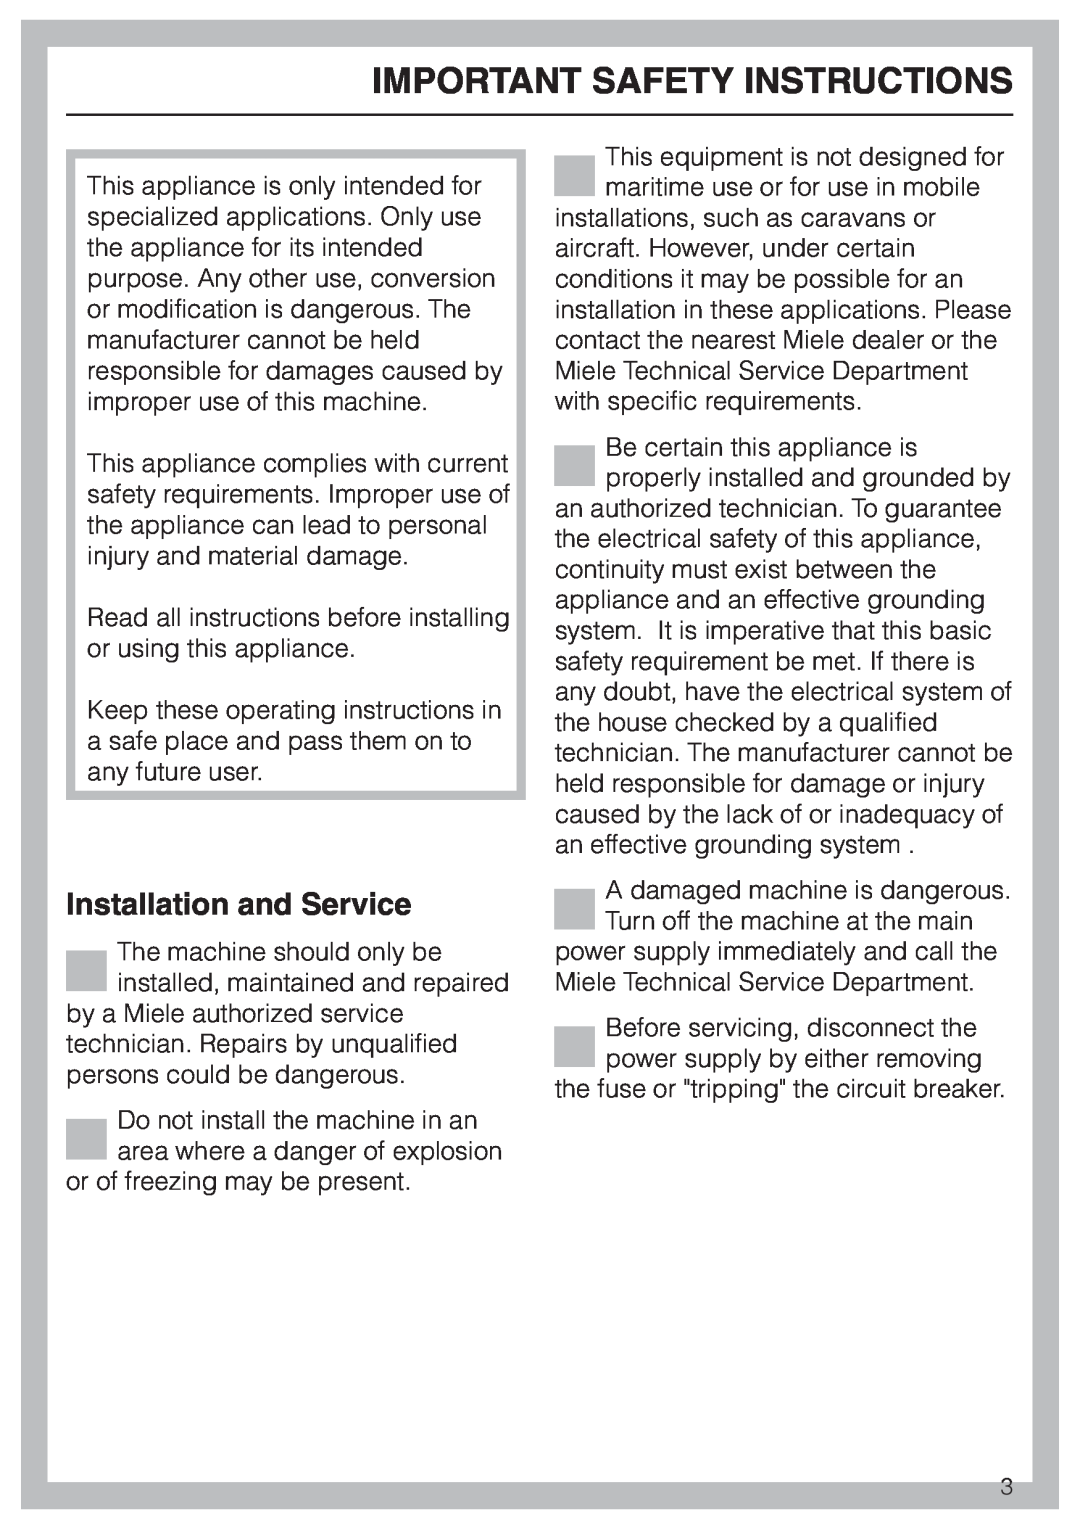 Miele G 7804 operating instructions Important Safety Instructions, Installation and Service 